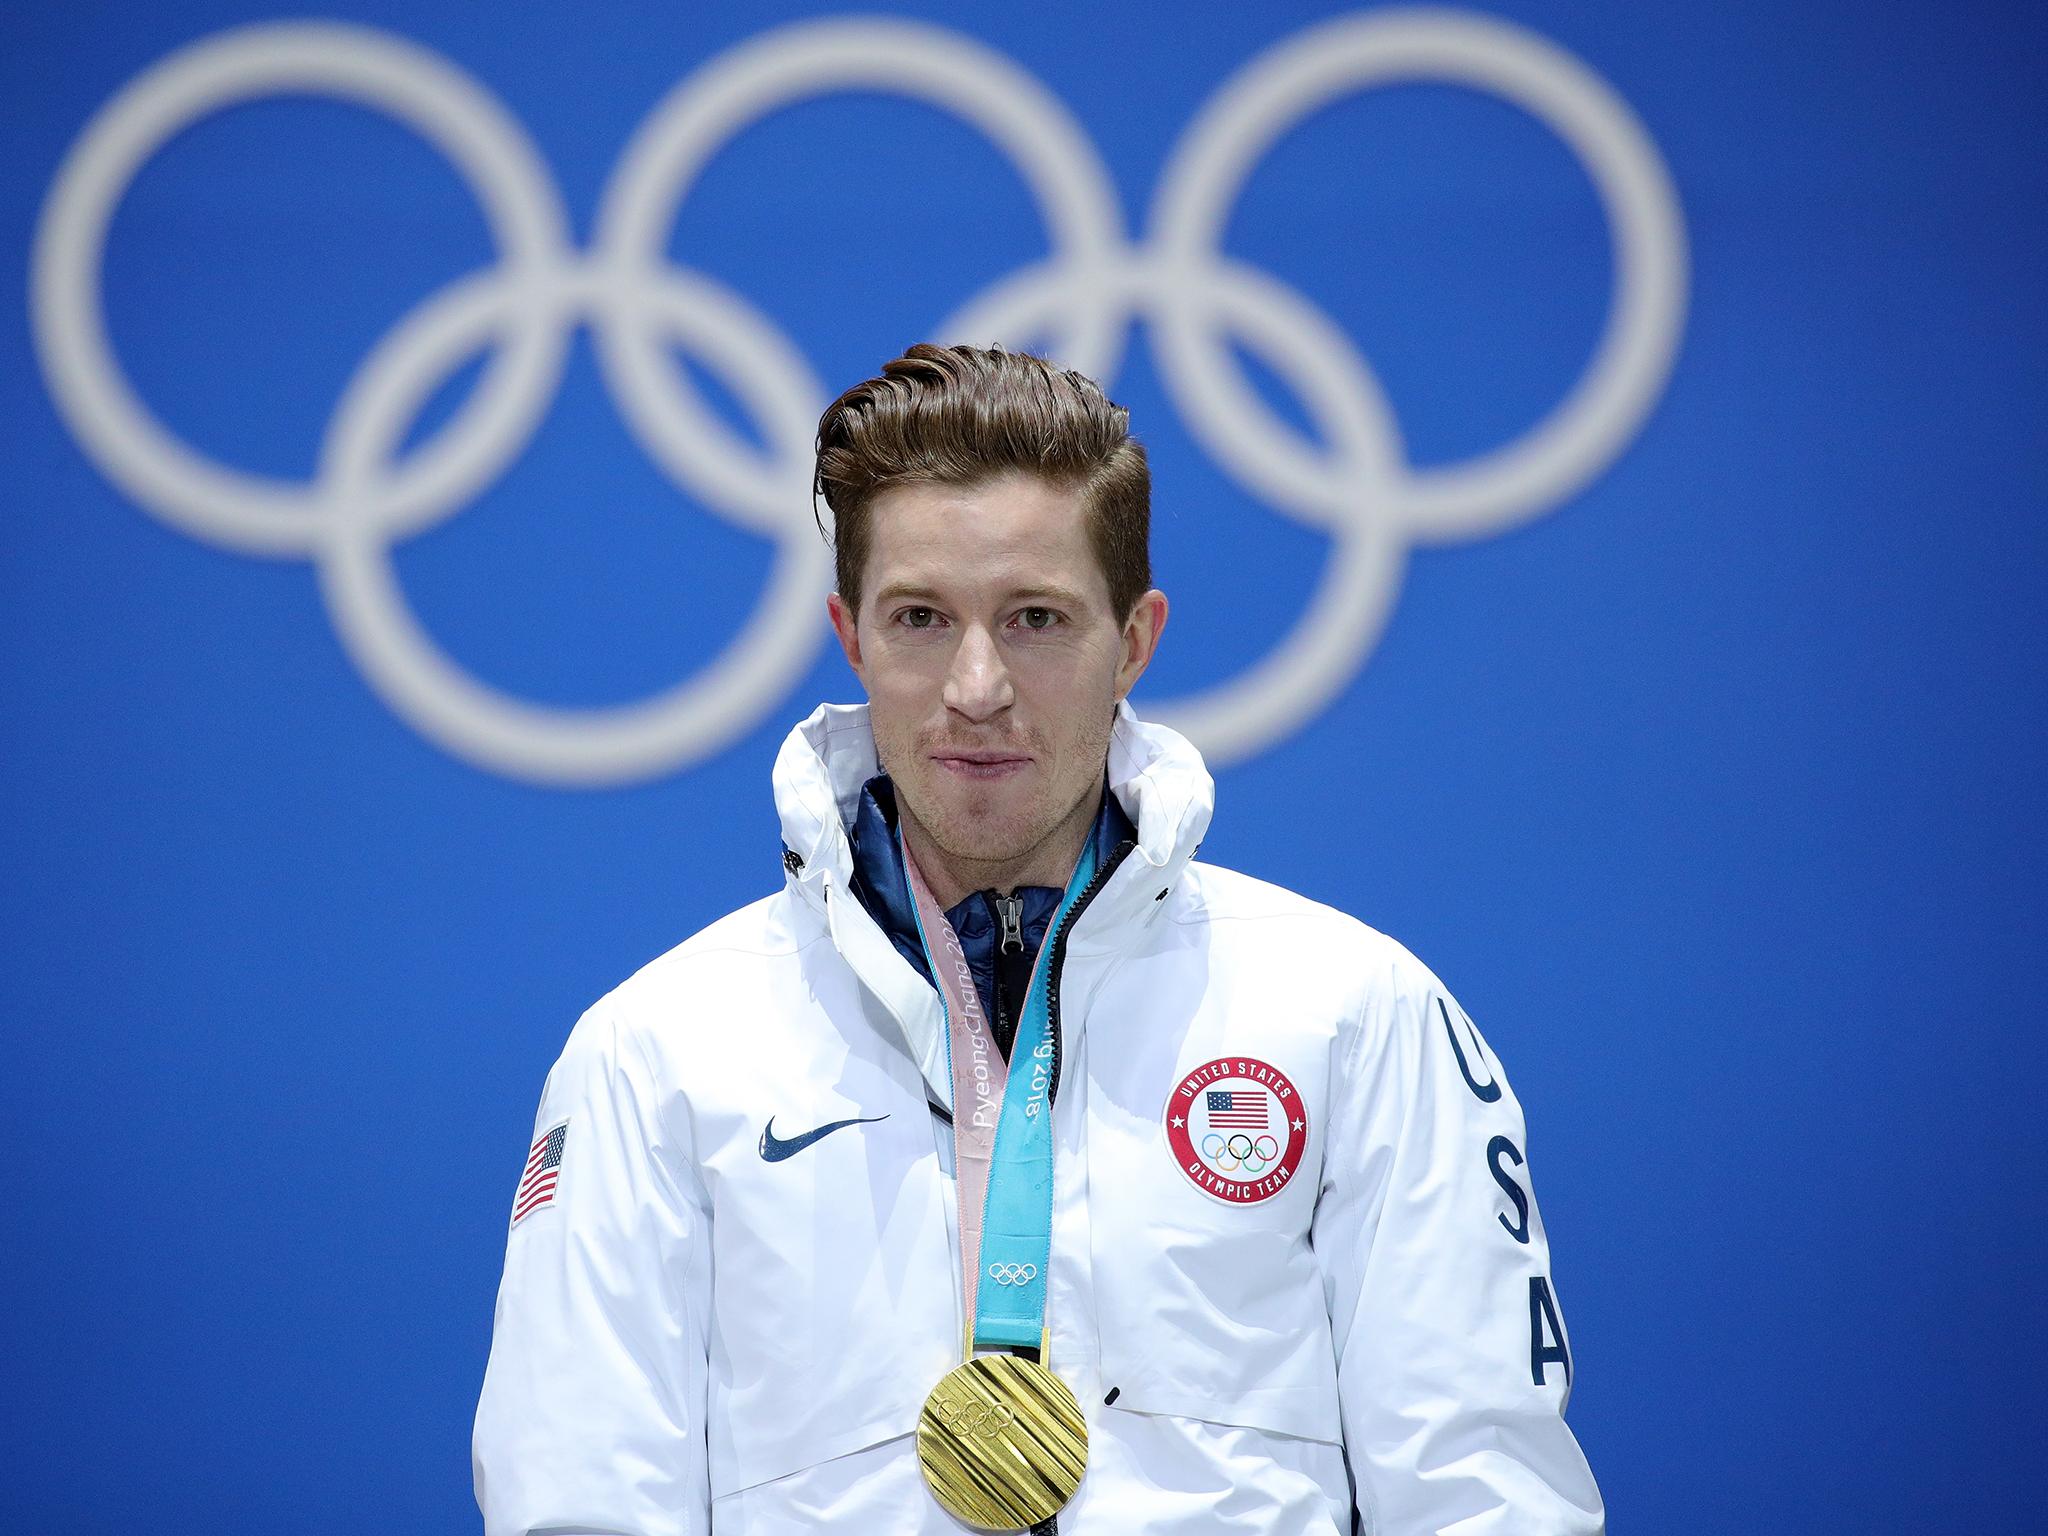 Two-time Olympic gold medalist and skateboard champion Shaun White